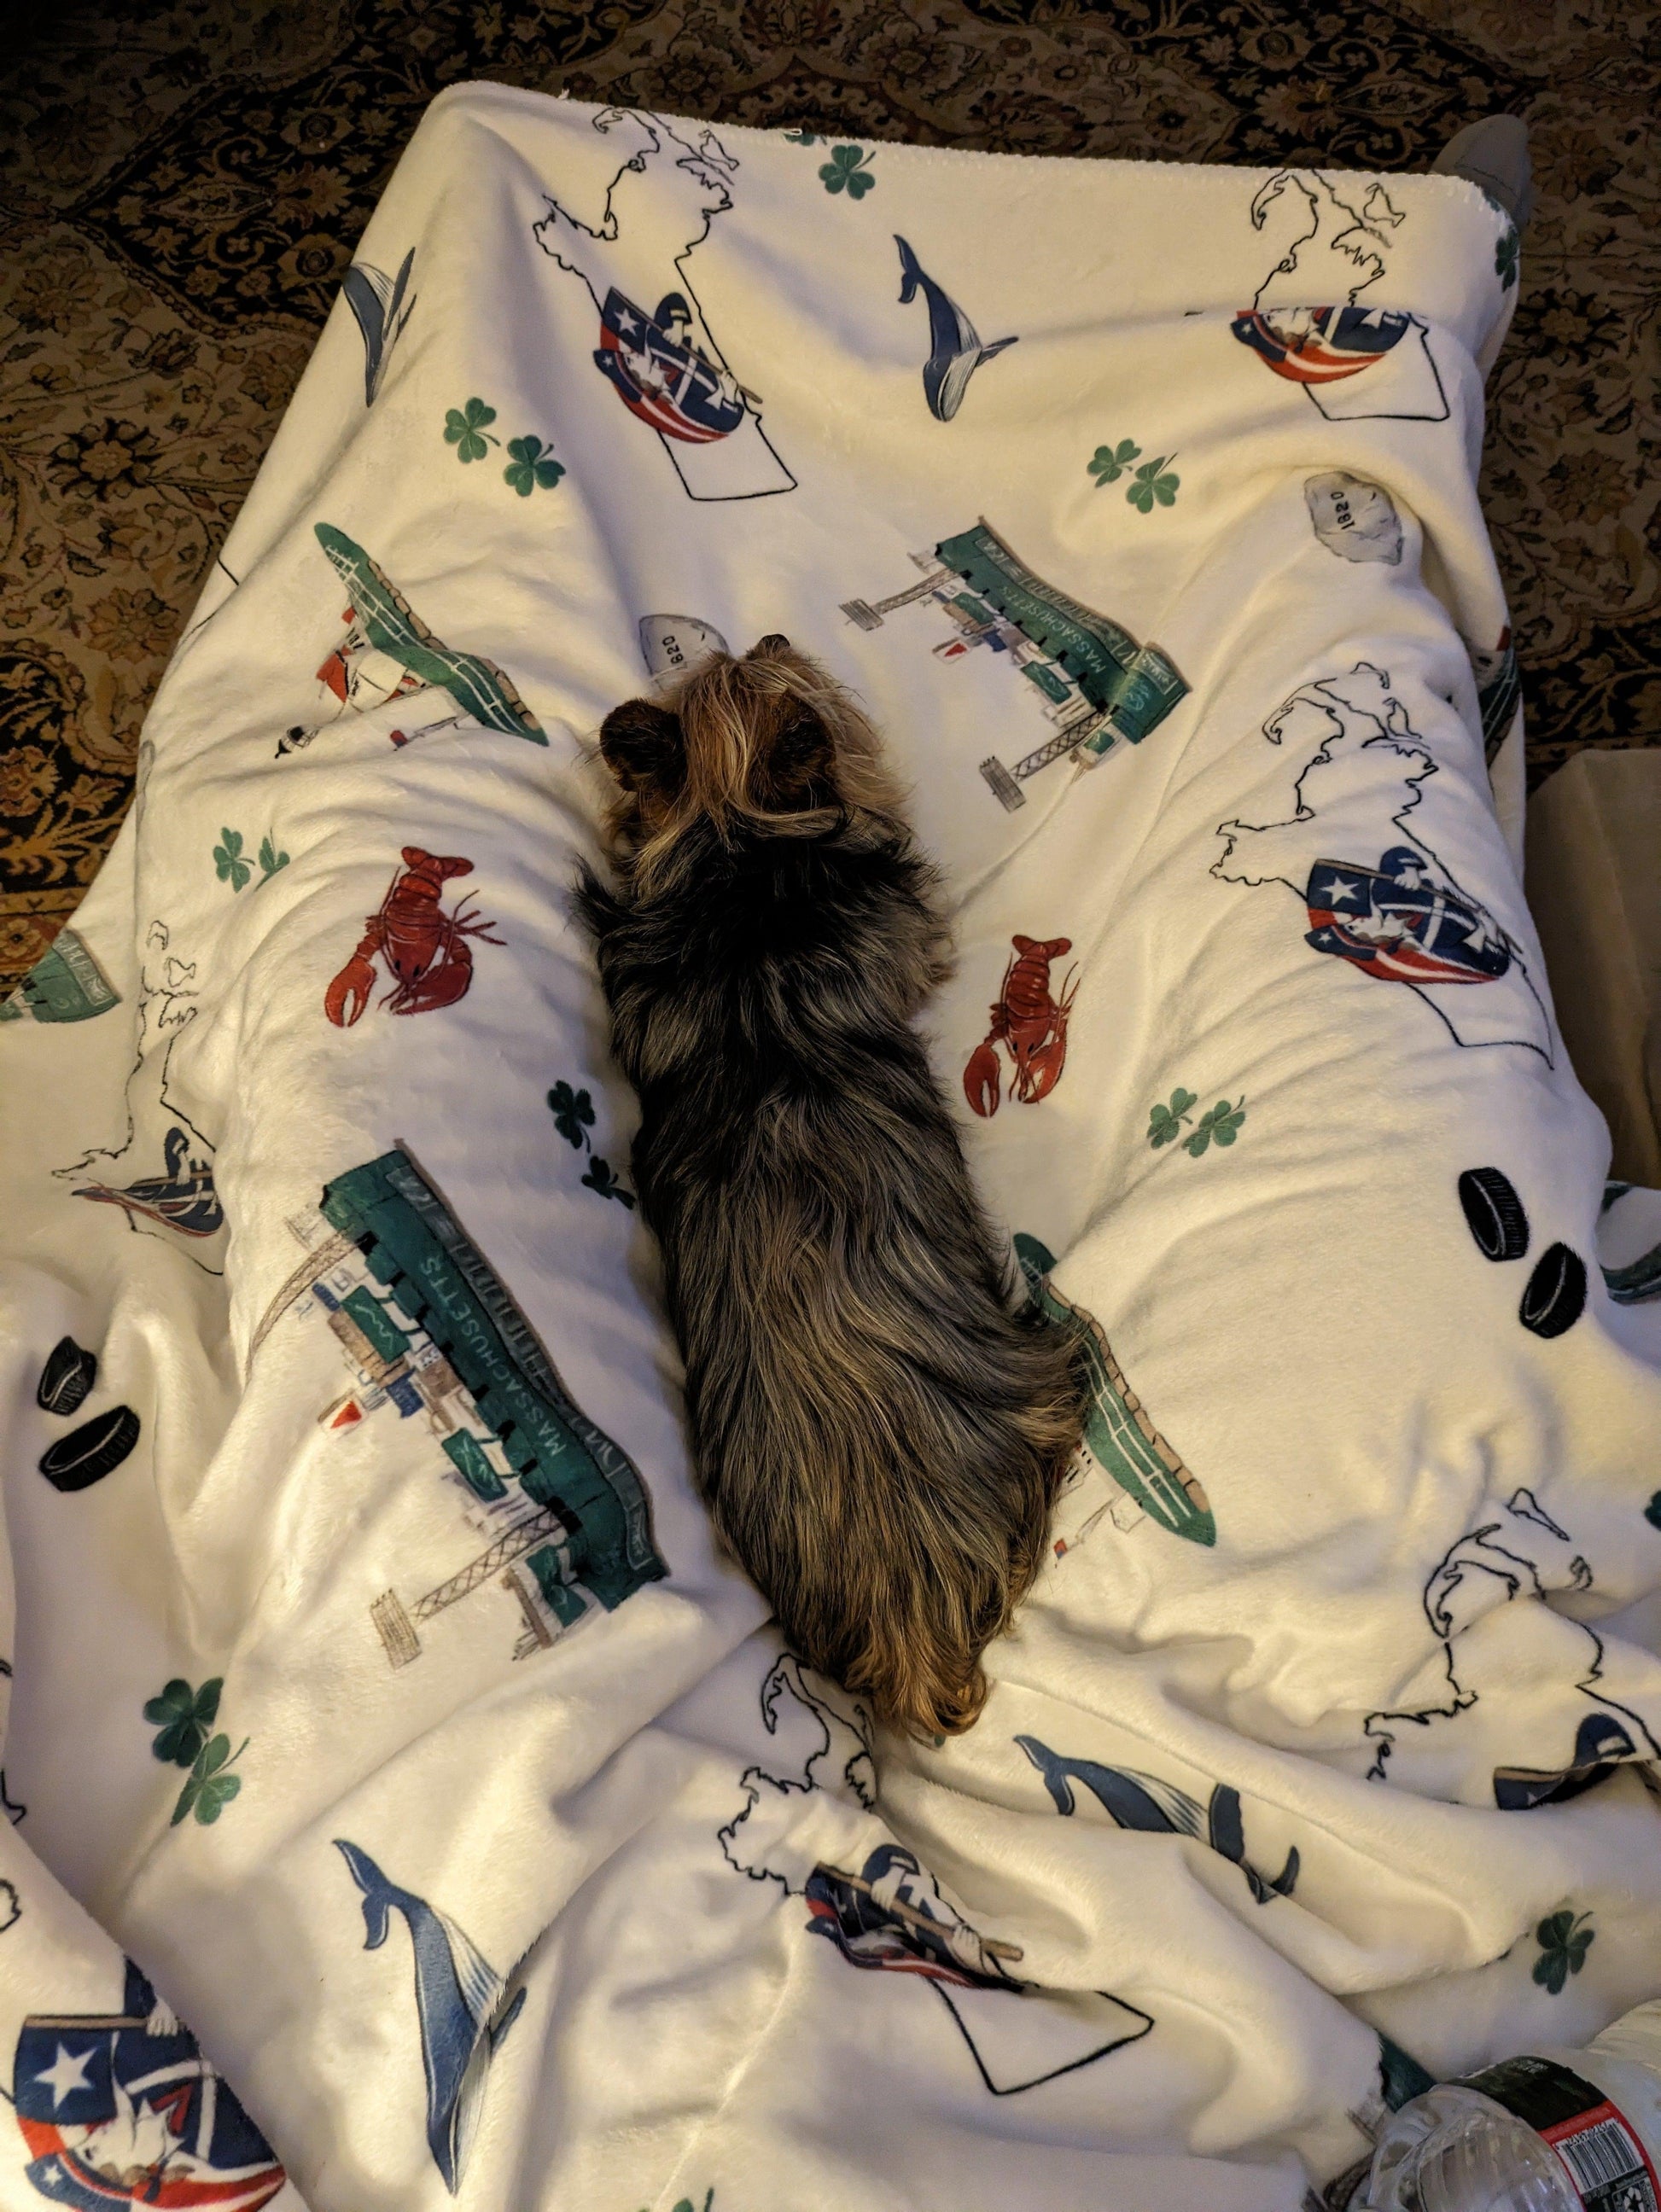 A small dog on a Massachusetts-themed plush throw blanket, 60x80 inches, featuring a lobsters, hockey pucks, shamrocks, Plymouth rock, a whale, a map of Massachusetts, and other iconic elements, vibrant colors.